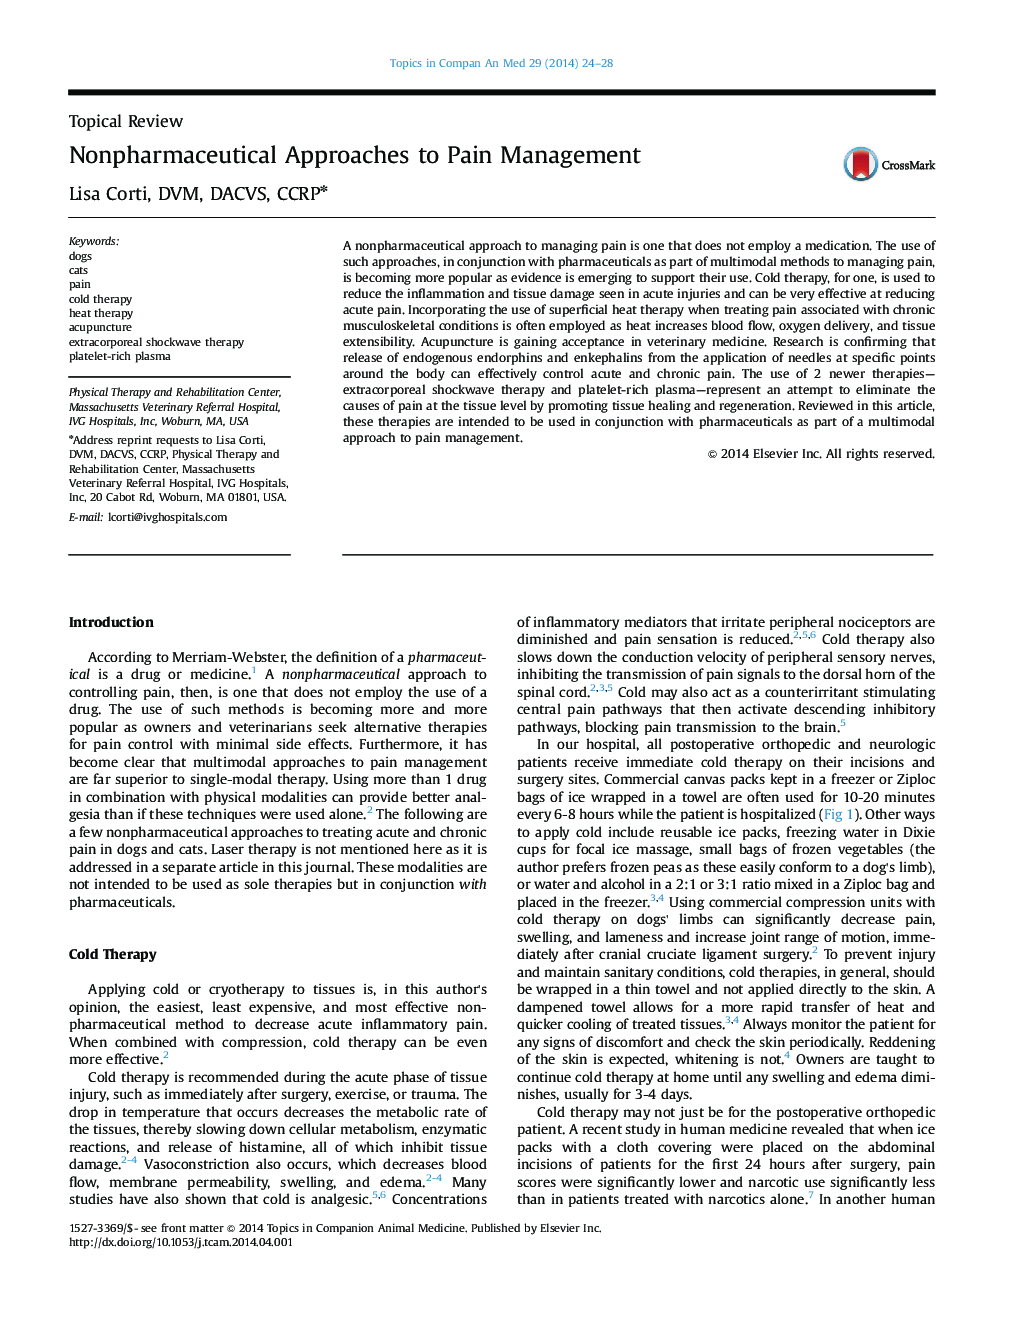 Nonpharmaceutical Approaches to Pain Management